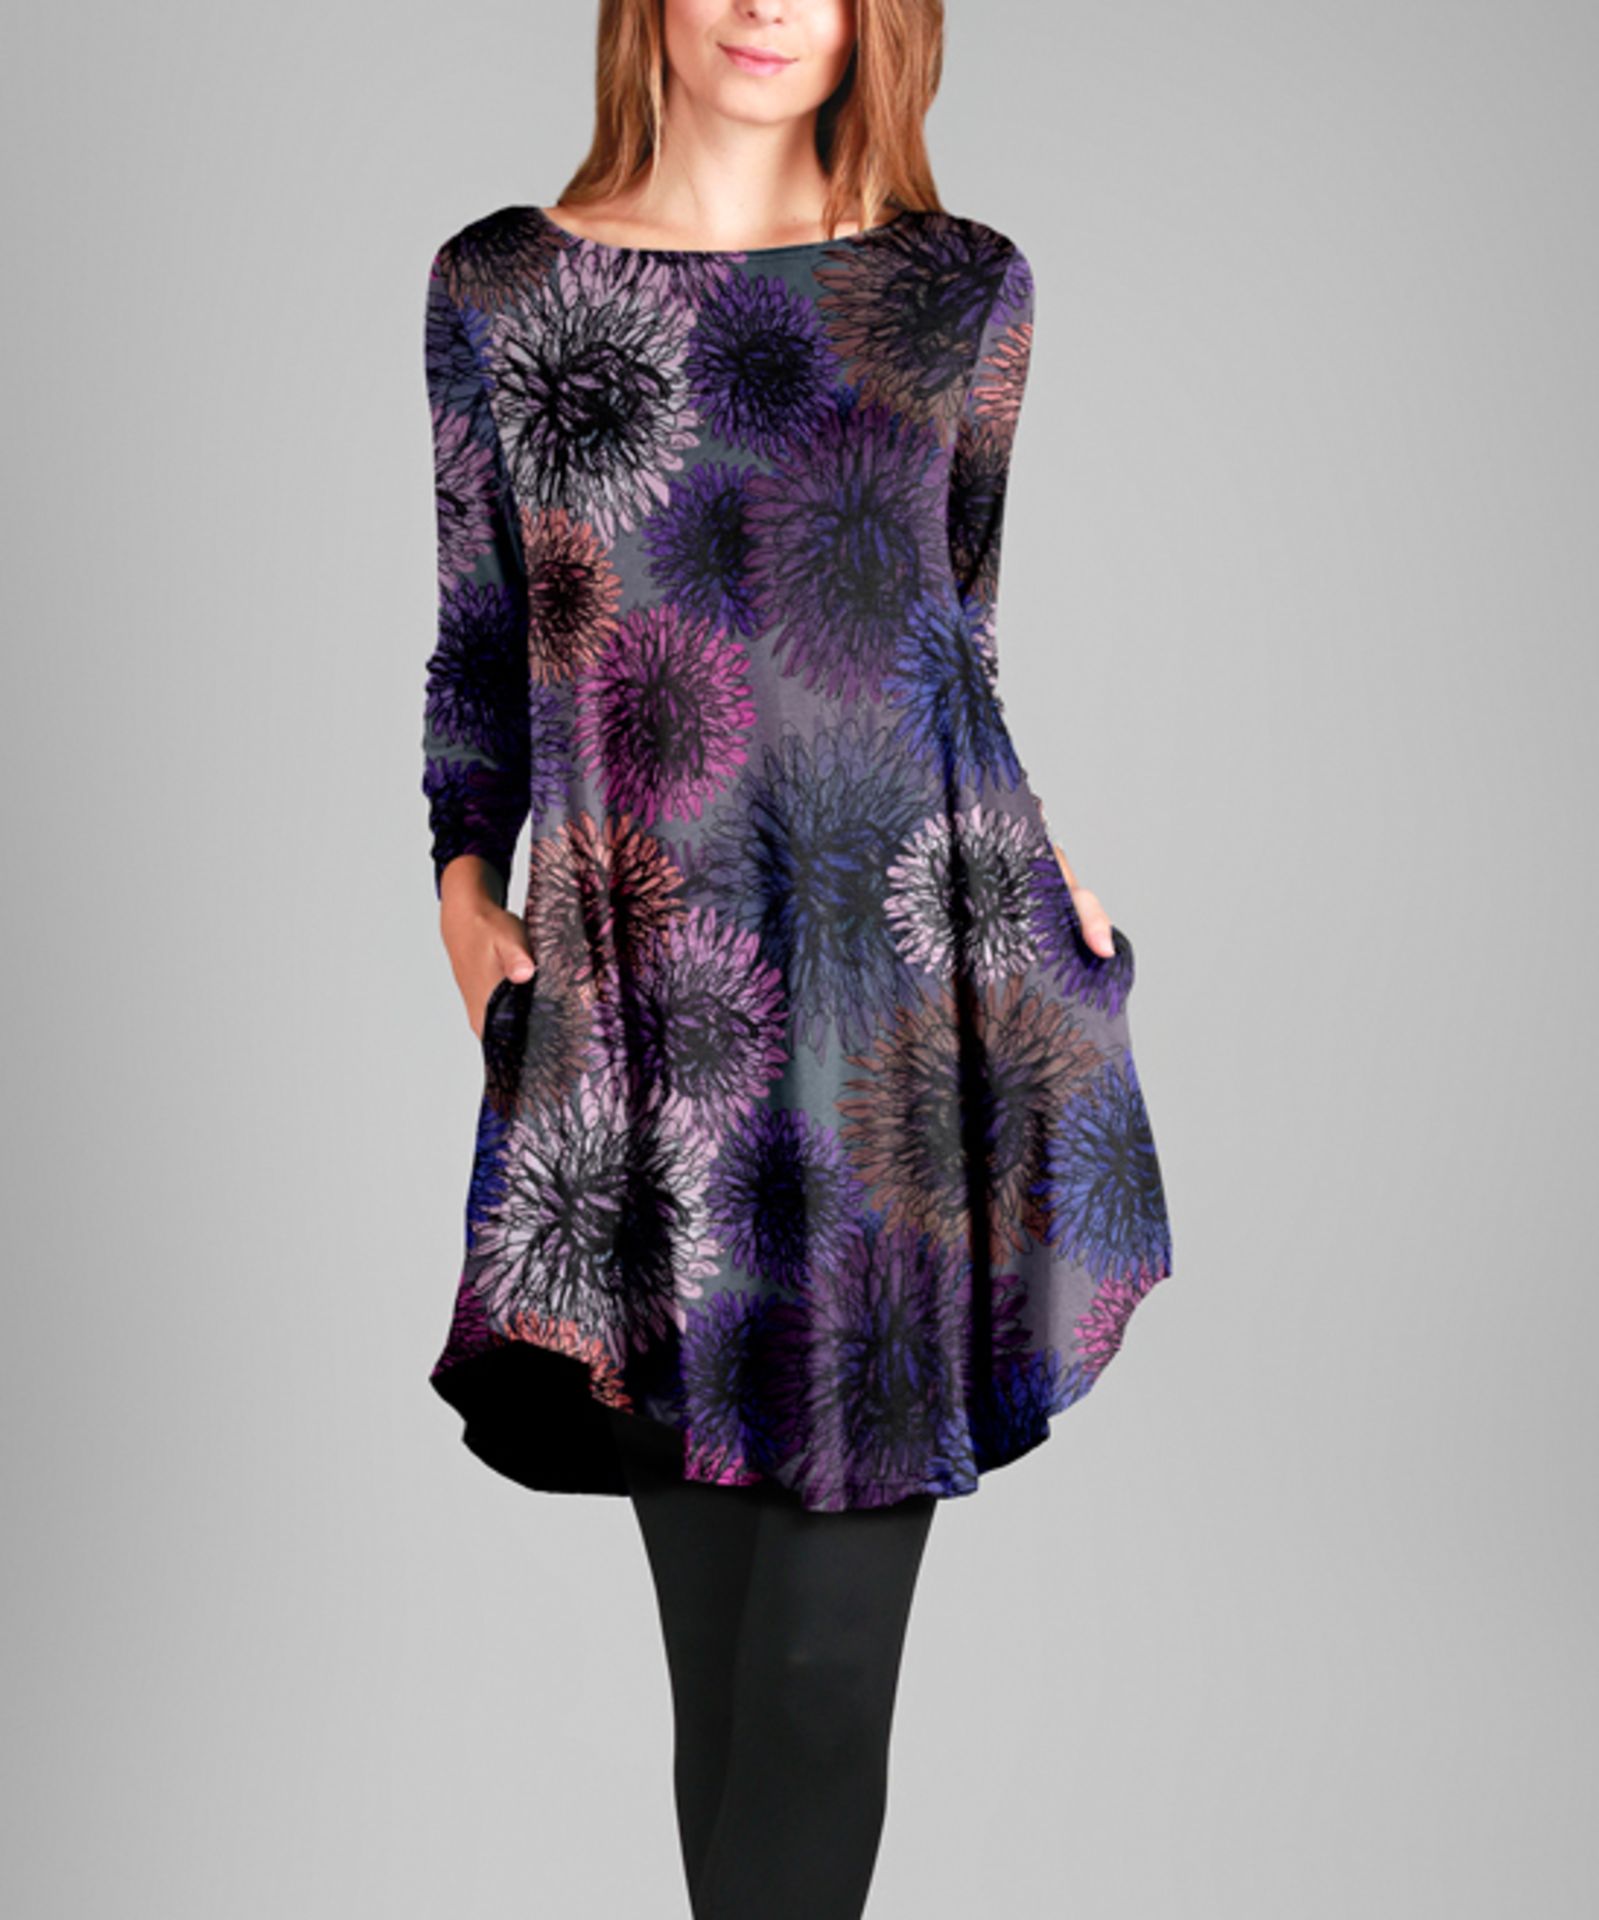 Simply Aster Purple & Gray Floral Pocket Boat-Neck Tunic - Plus Too (Us Size: 3X) [Ref: 42620124]